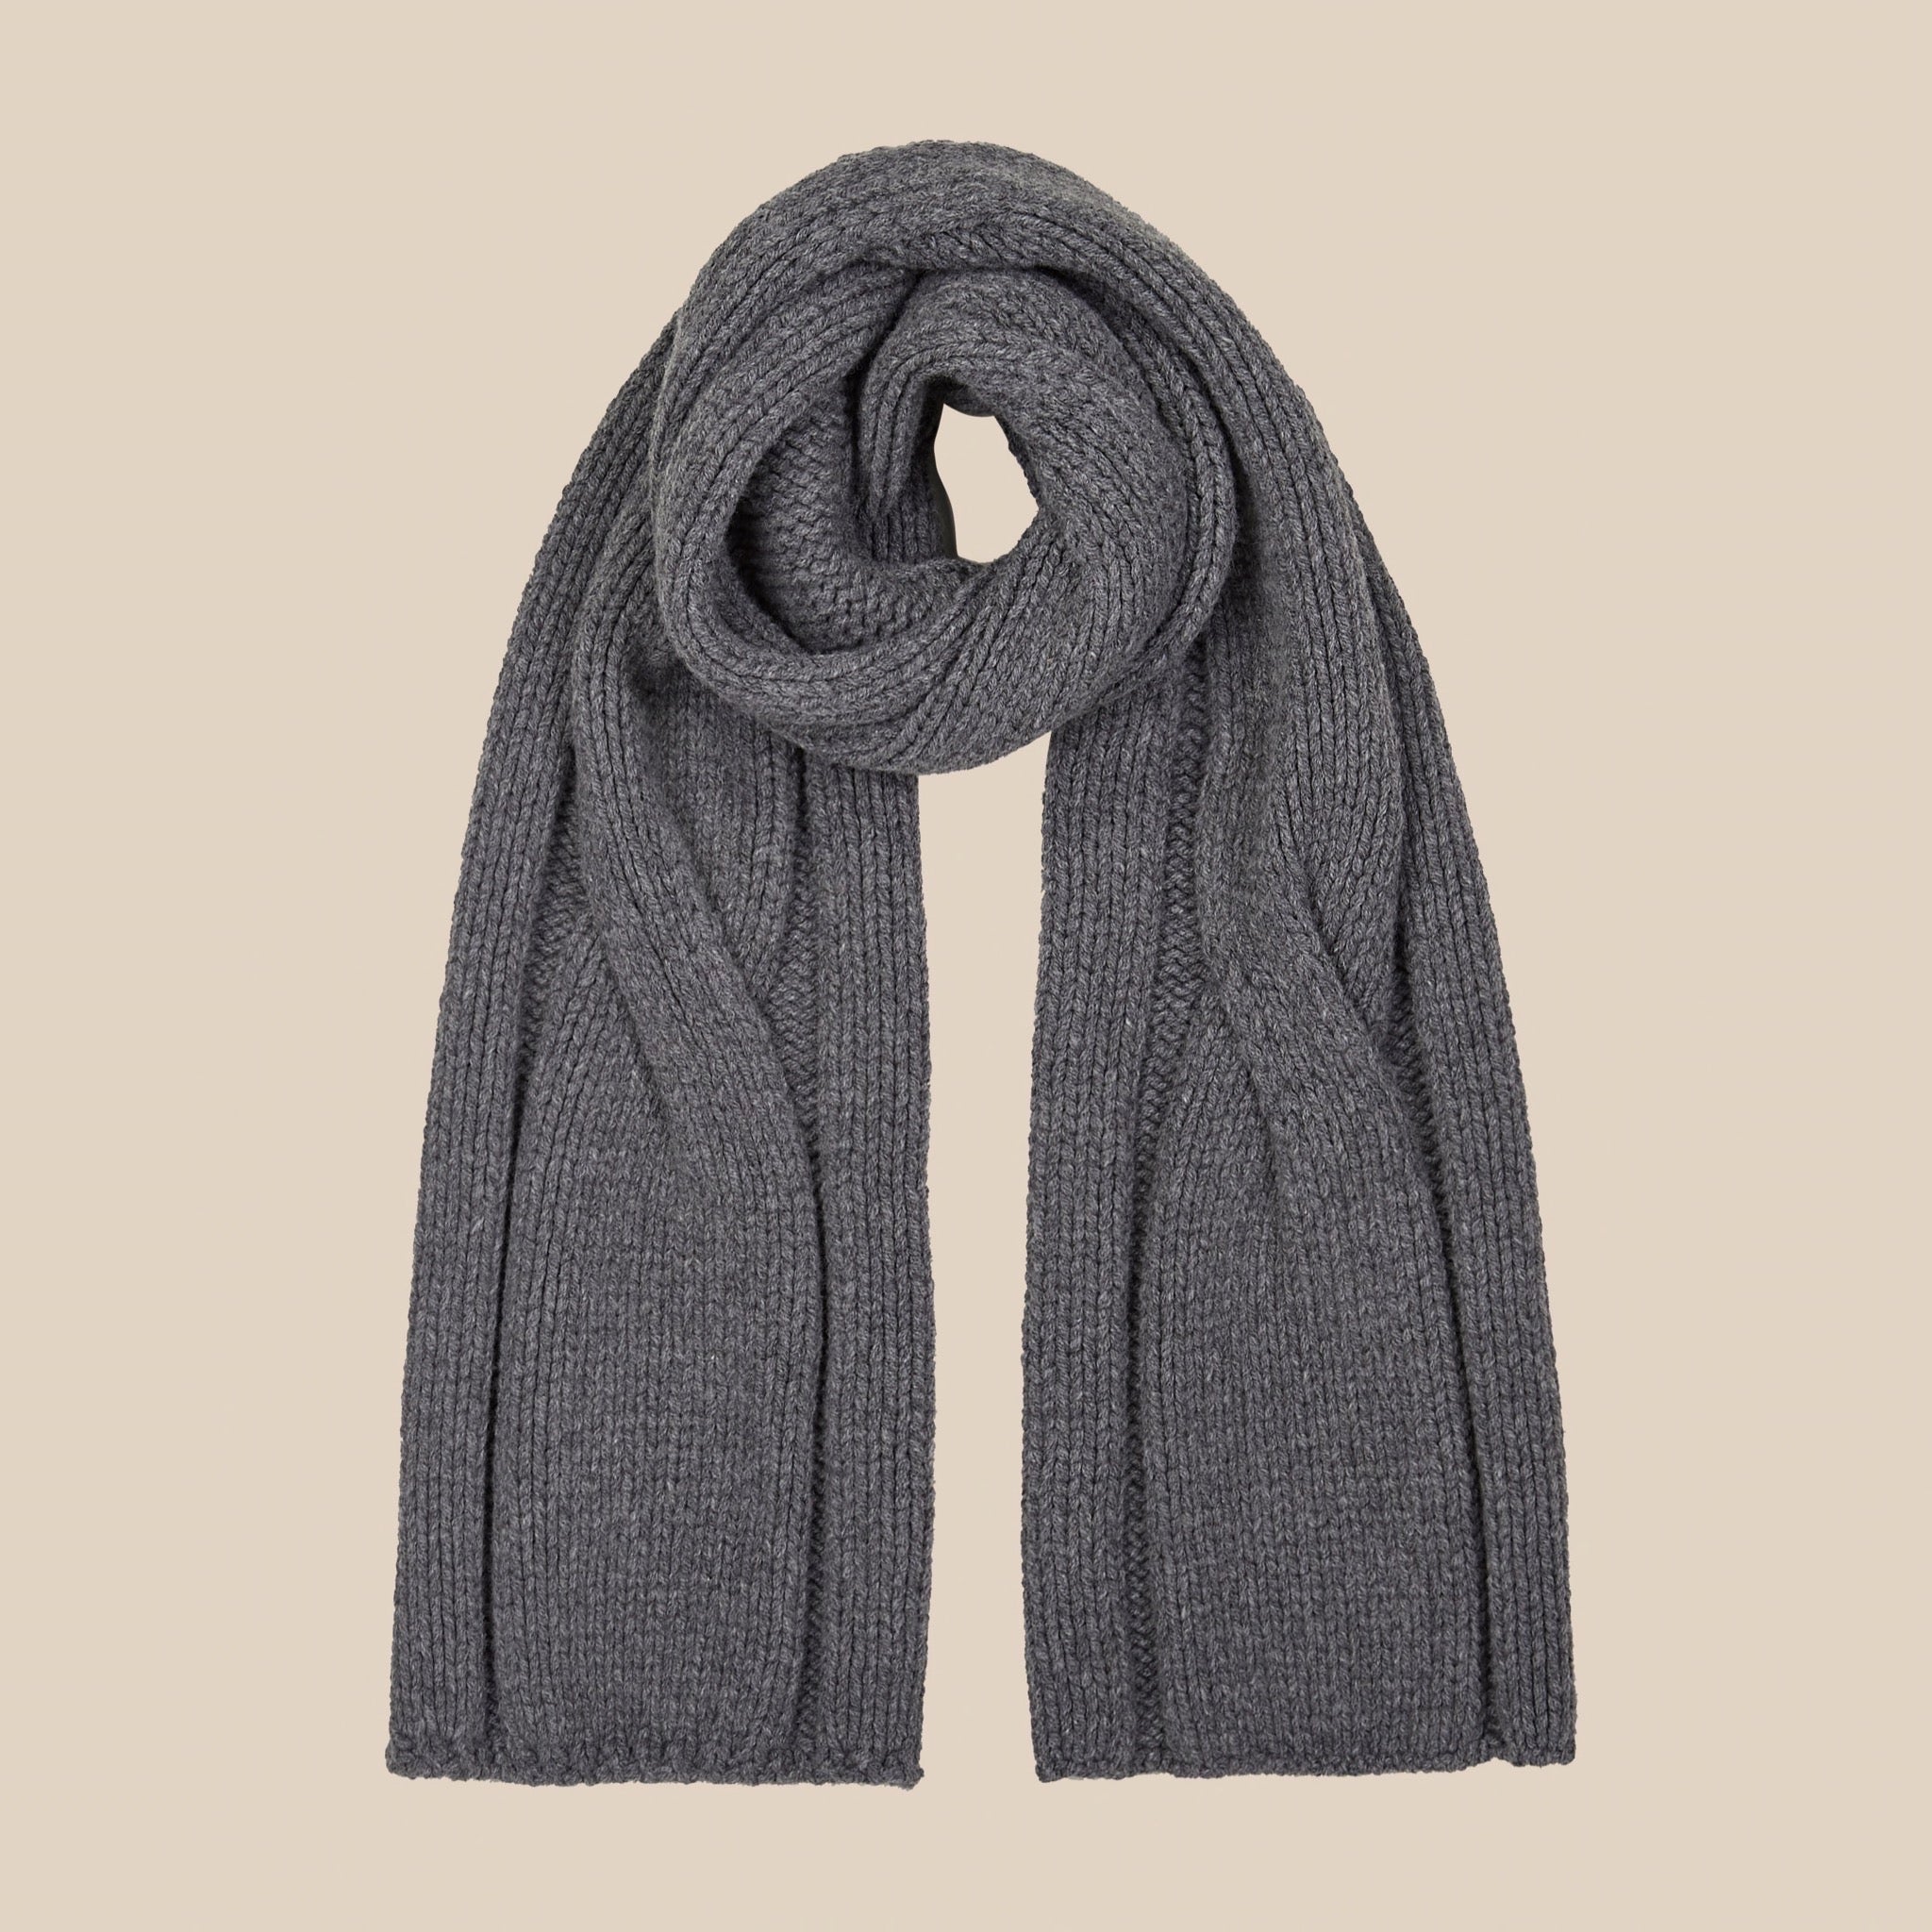 Lambswool scarf in grey